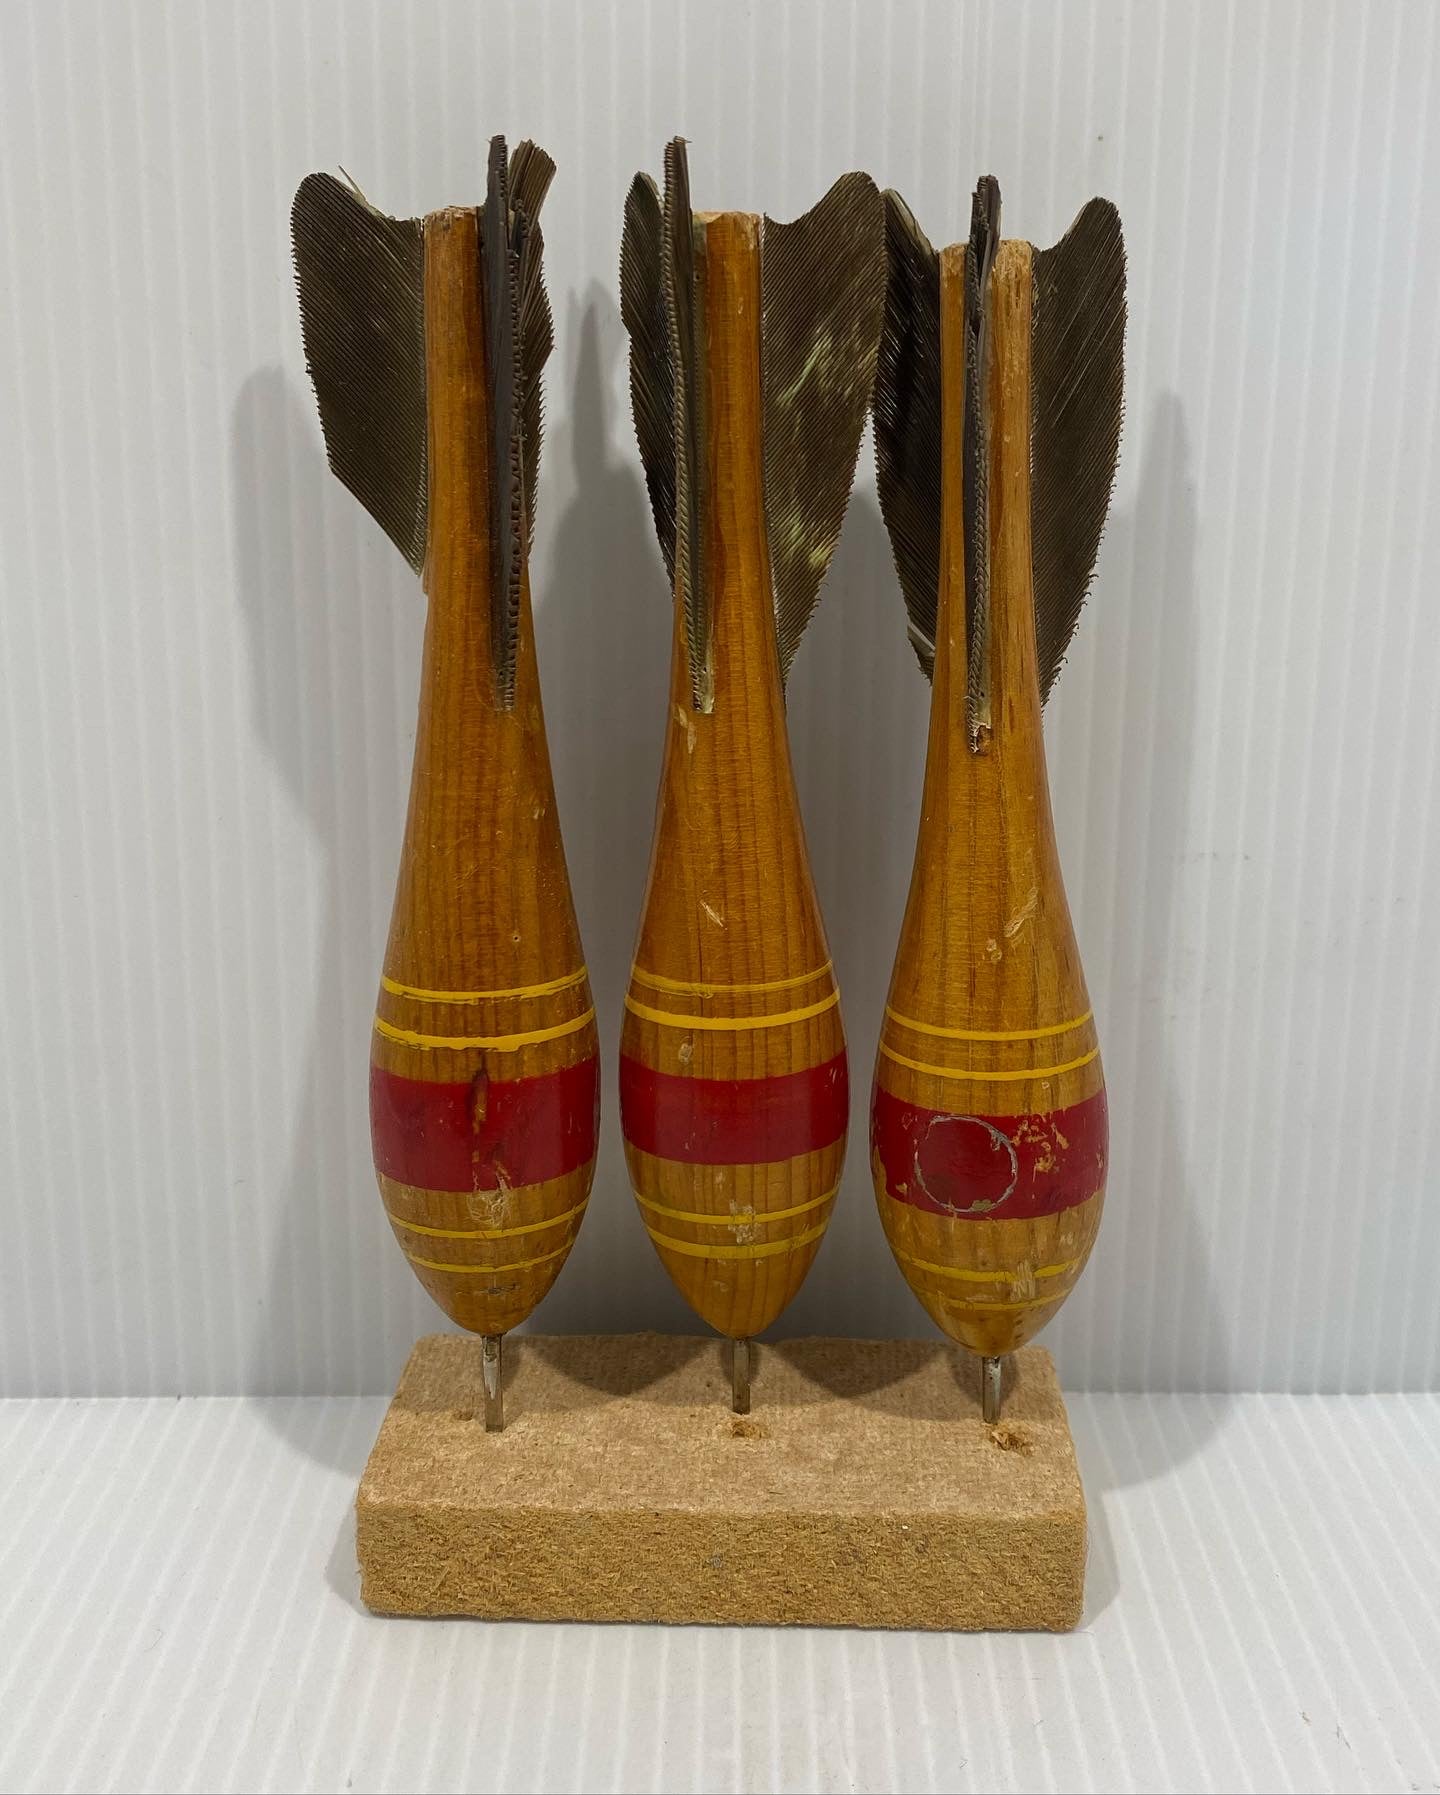 Darts made of solid wood